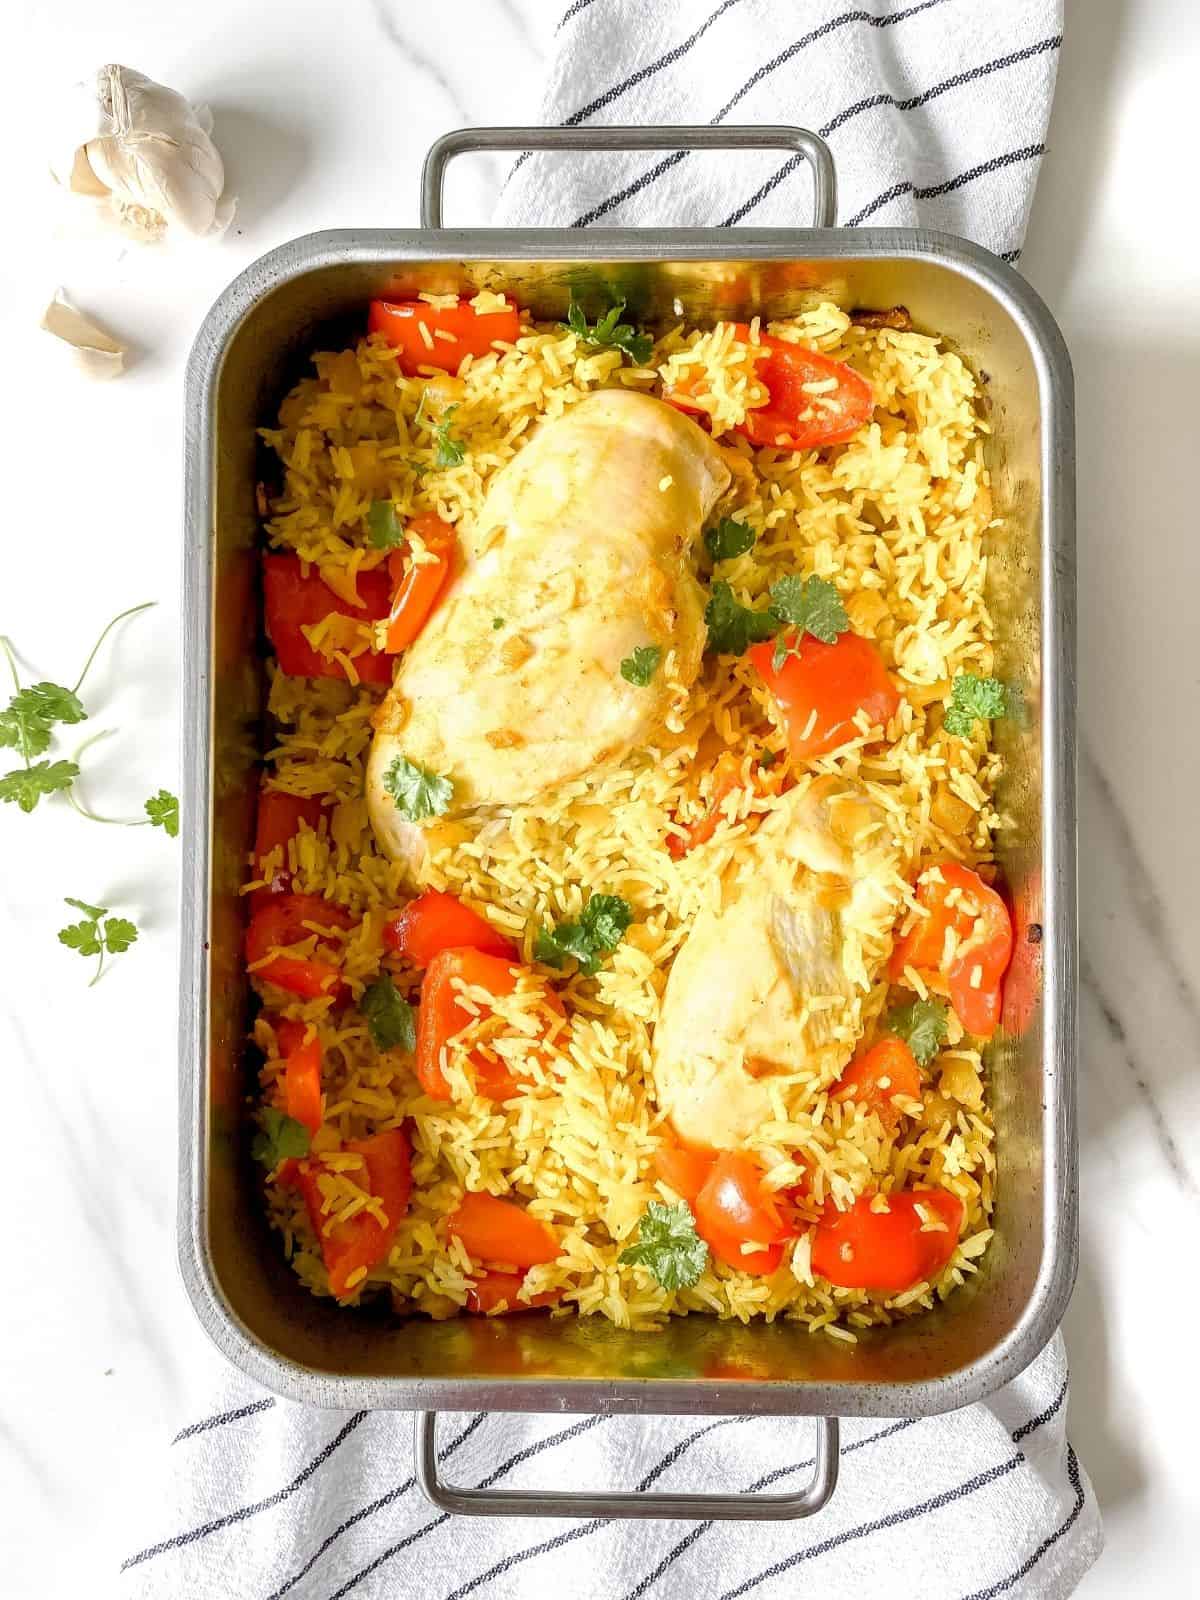 ginger chicken pilaf traybake in a metal dish on a striped cloth.